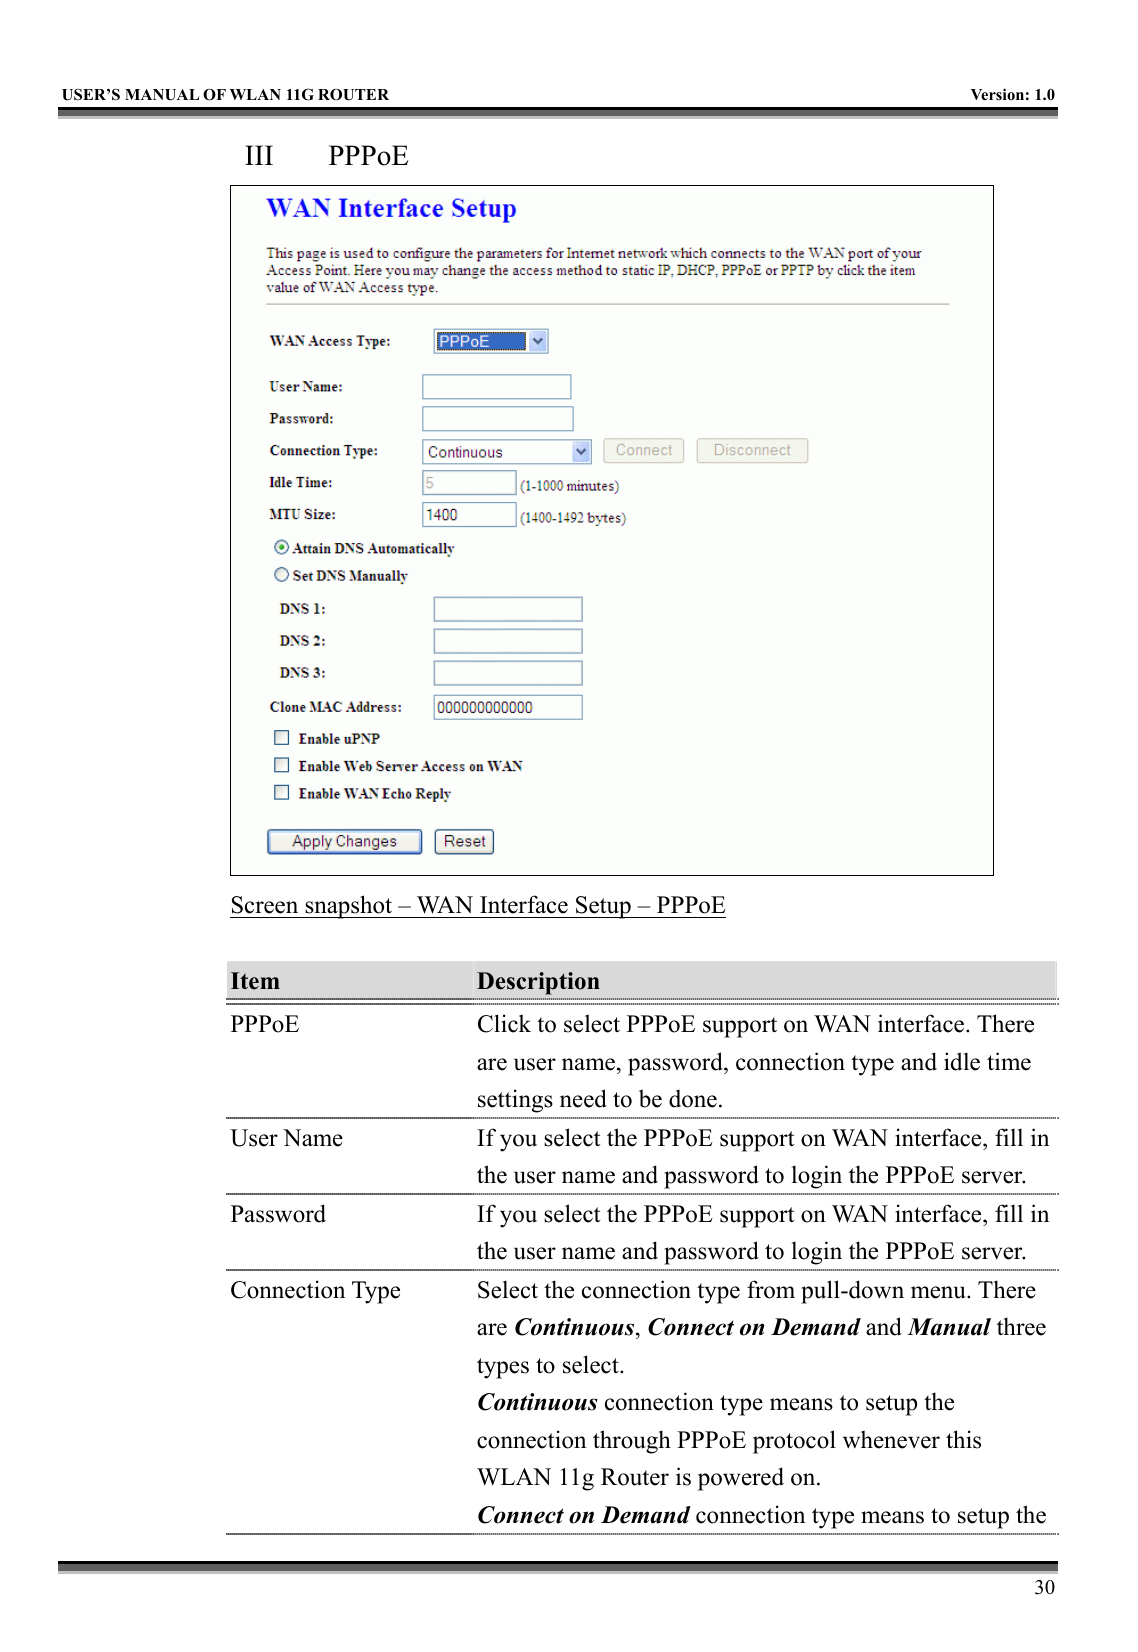   USER’S MANUAL OF WLAN 11G ROUTER    Version: 1.0     30 III  PPPoE  Screen snapshot – WAN Interface Setup – PPPoE  Item  Description   PPPoE  Click to select PPPoE support on WAN interface. There are user name, password, connection type and idle time settings need to be done. User Name  If you select the PPPoE support on WAN interface, fill in the user name and password to login the PPPoE server. Password  If you select the PPPoE support on WAN interface, fill in the user name and password to login the PPPoE server. Connection Type  Select the connection type from pull-down menu. There are Continuous, Connect on Demand and Manual three types to select. Continuous connection type means to setup the connection through PPPoE protocol whenever this WLAN 11g Router is powered on. Connect on Demand connection type means to setup the 